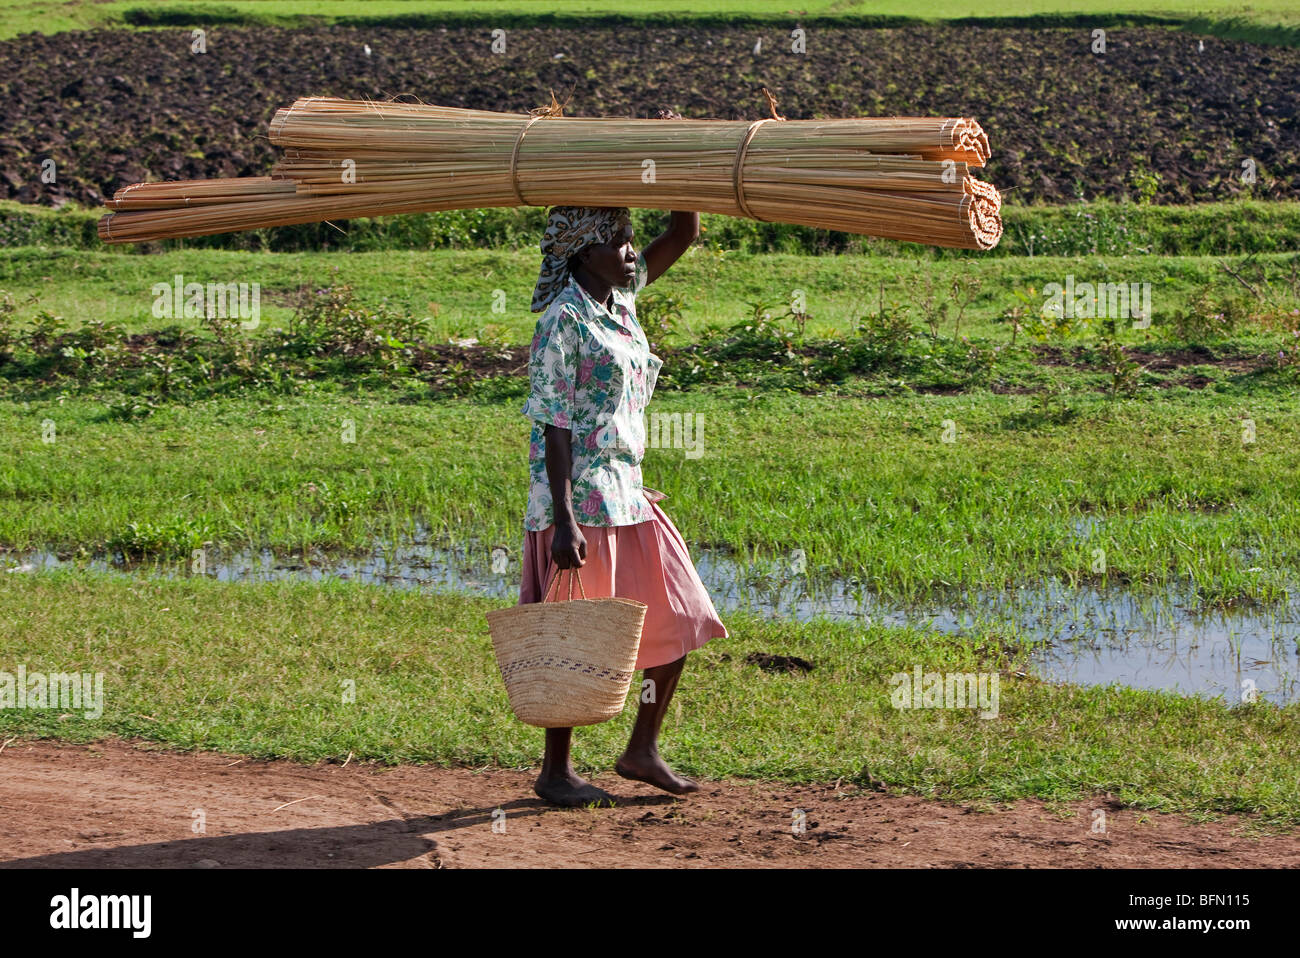 Kenya, Kisumu District. A woman walks home from market with a papyrus mat on her head. Stock Photo